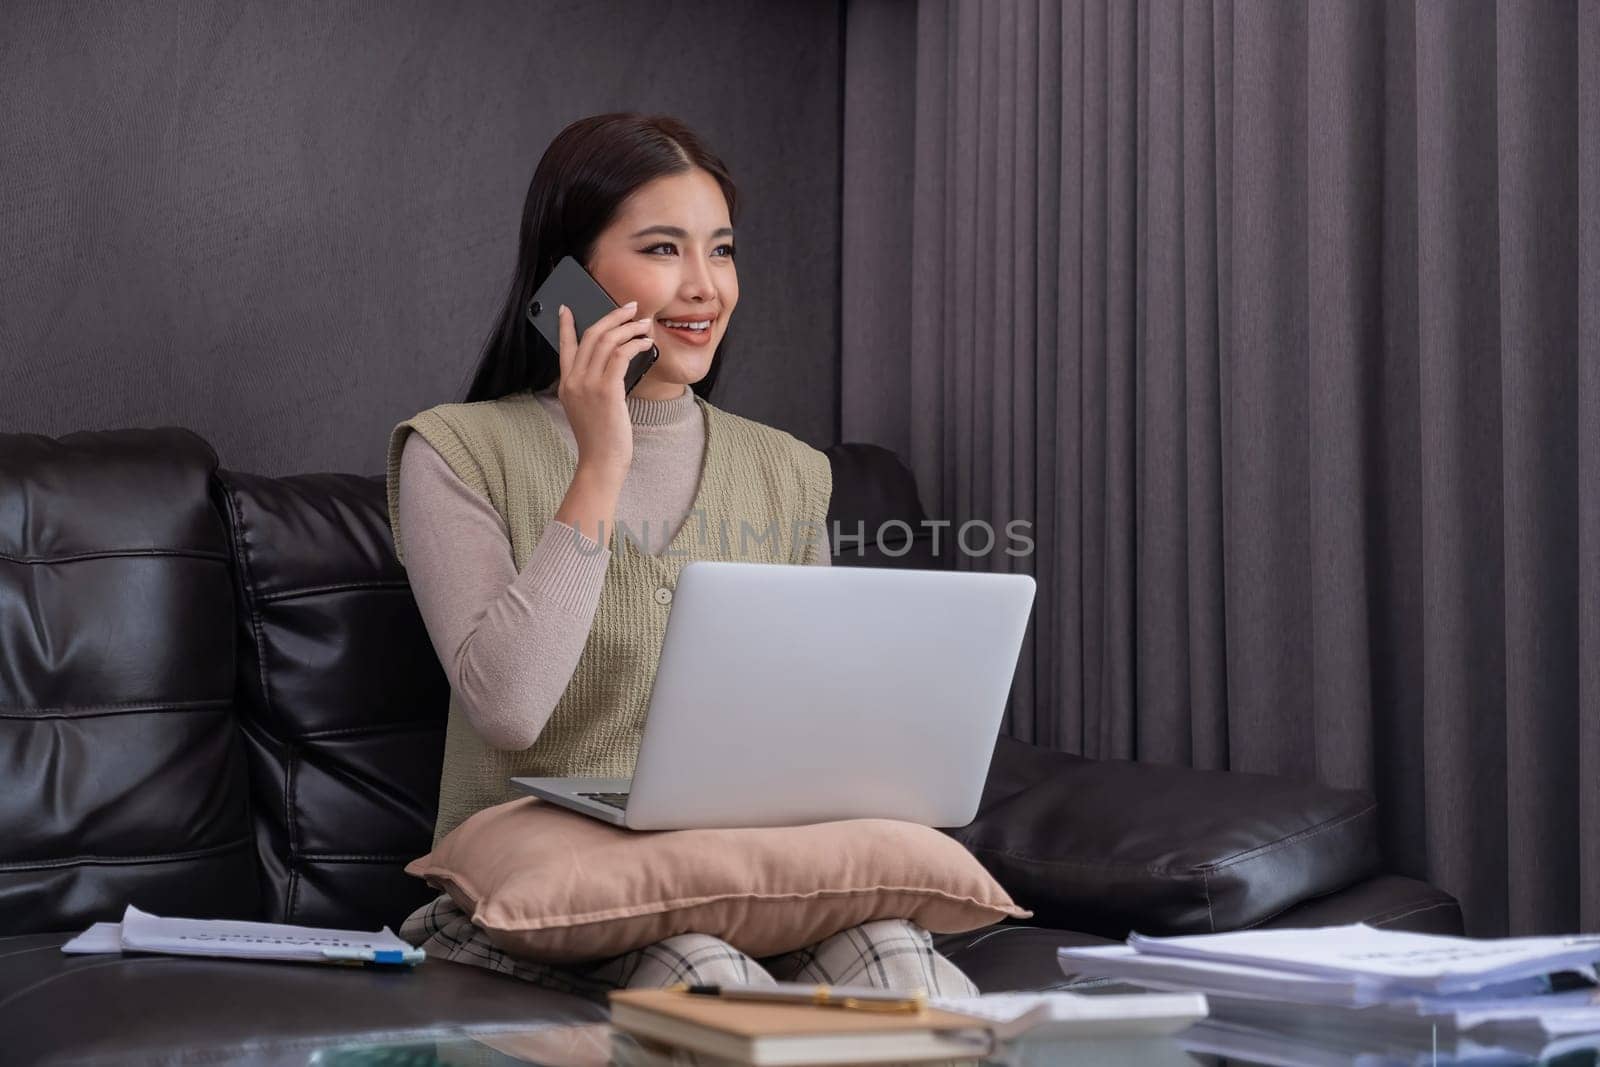 Woman Using Laptop and Smartphone on Sofa. Concept of multitasking and modern lifestyle. by wichayada